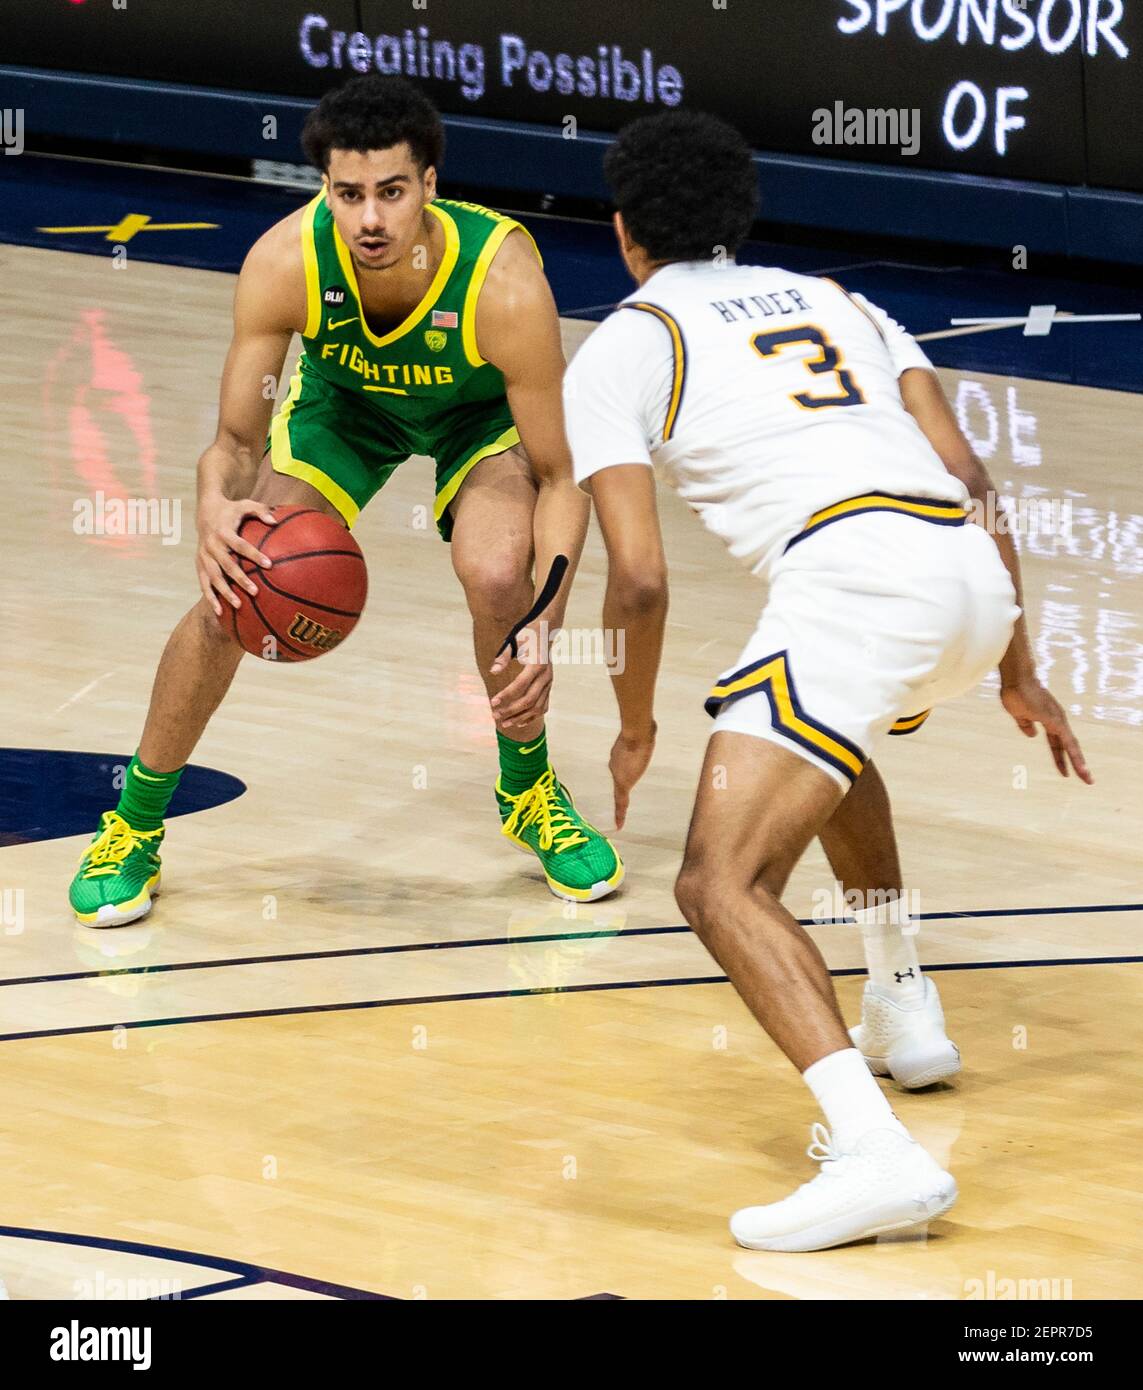 February 27 2021 Berkeley, CA U.S.A. Oregon guard Will Richardson (0) goes to the basket during the NCAA Men's Basketball game between Oregon Ducks and the California Golden Bears 74-63 win at Hass Pavilion Berkeley Calif. Thurman James / CSM Stock Photo